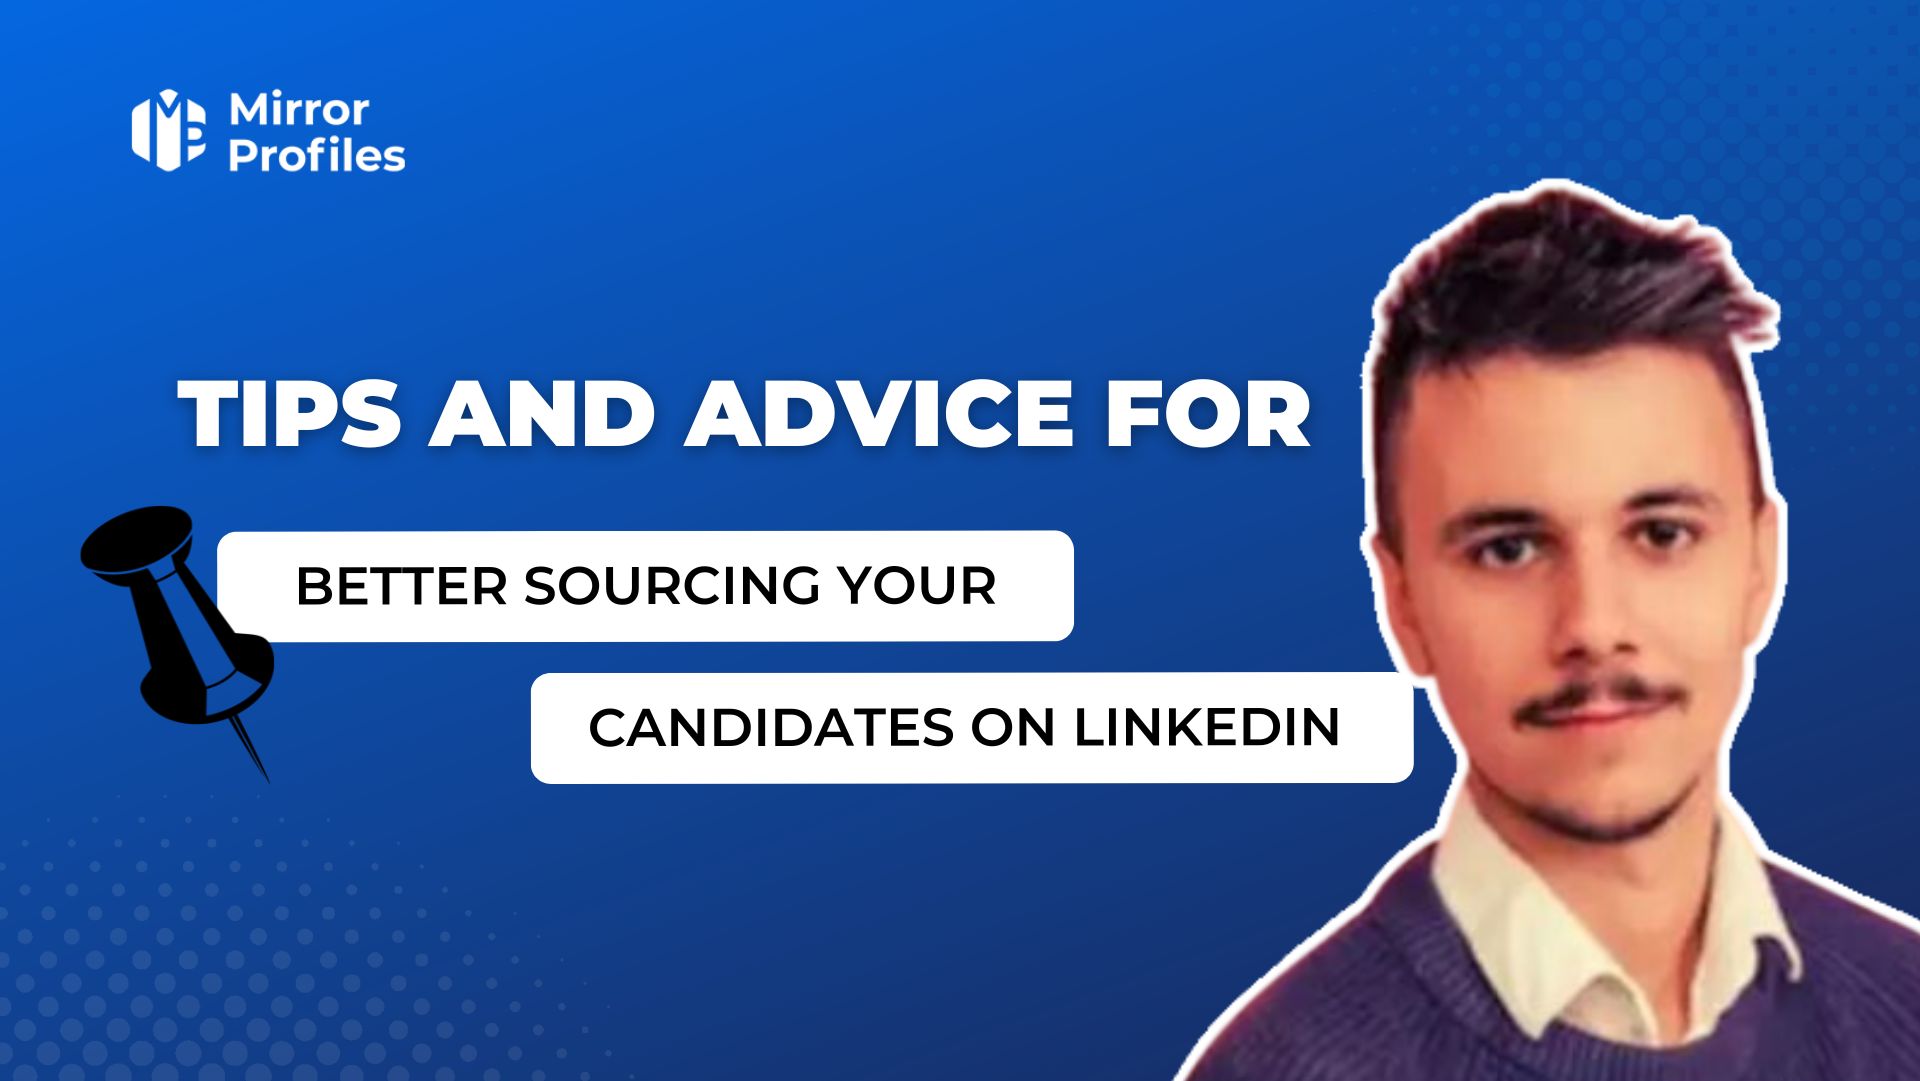 Tips and advice for better sourcing your candidates on Linkedin